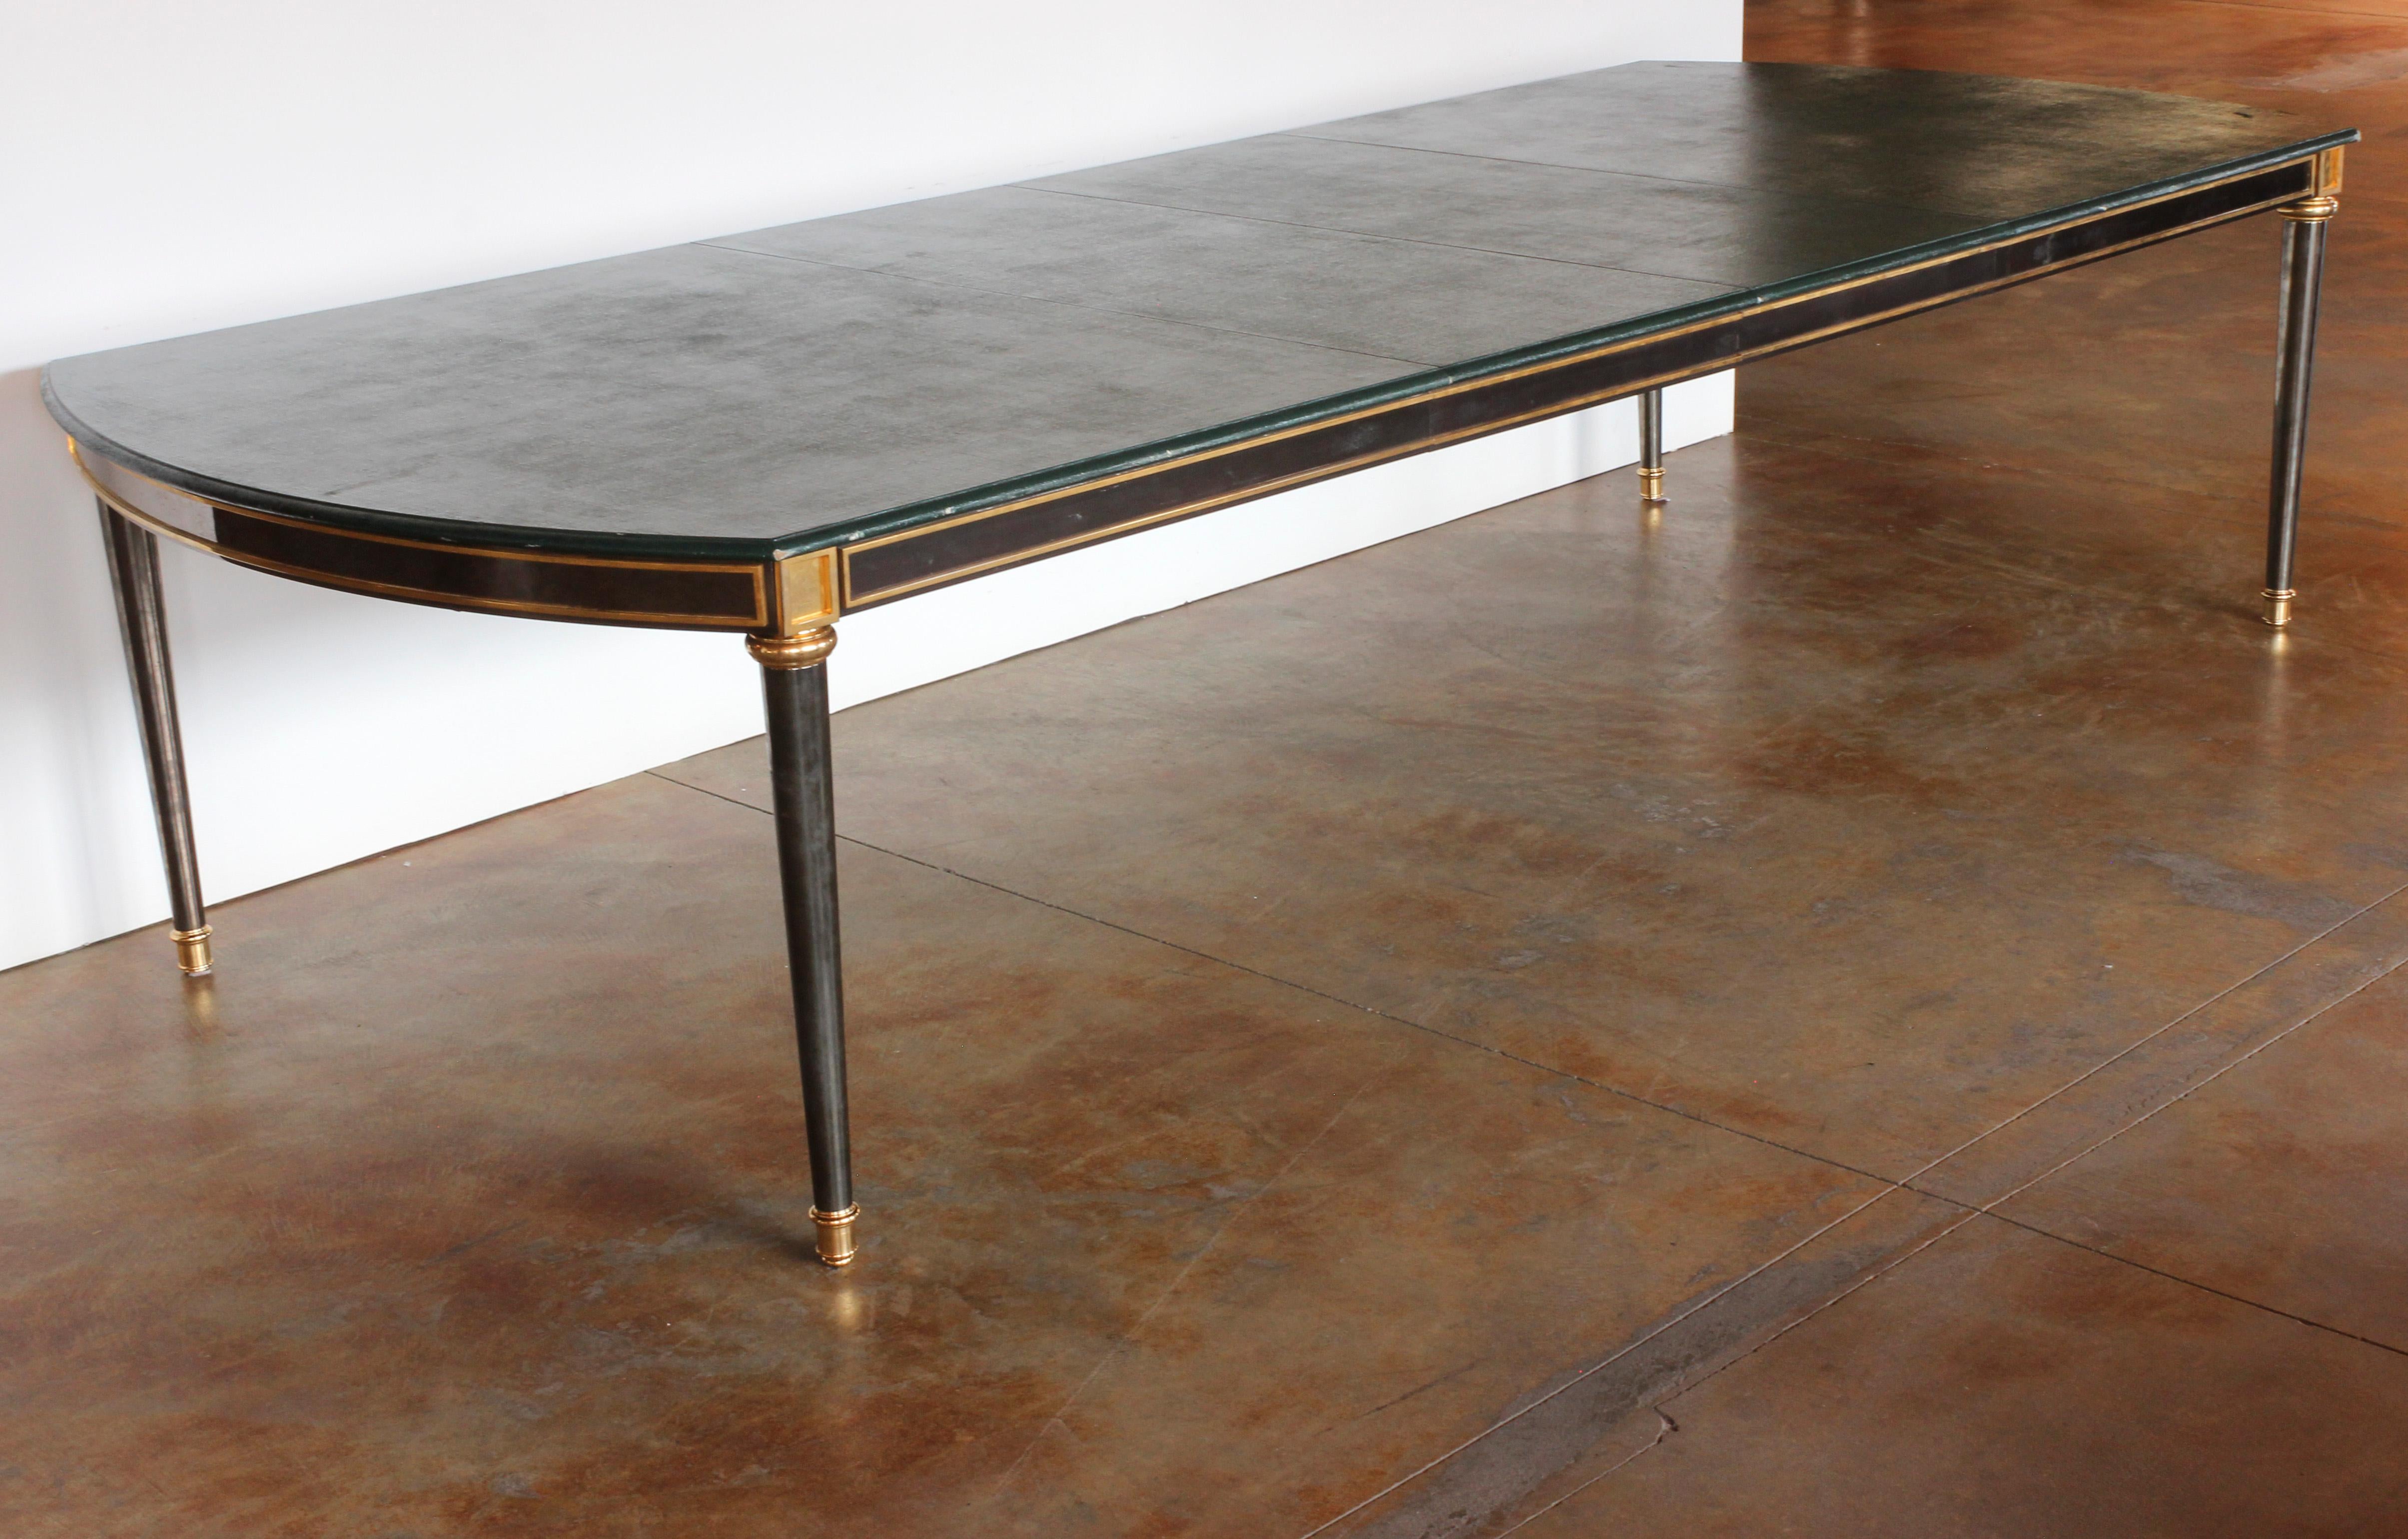 Late 19th/Early 20th Century Neoclassical Style Gilt-Bronze-Mounted Dining Table For Sale 12